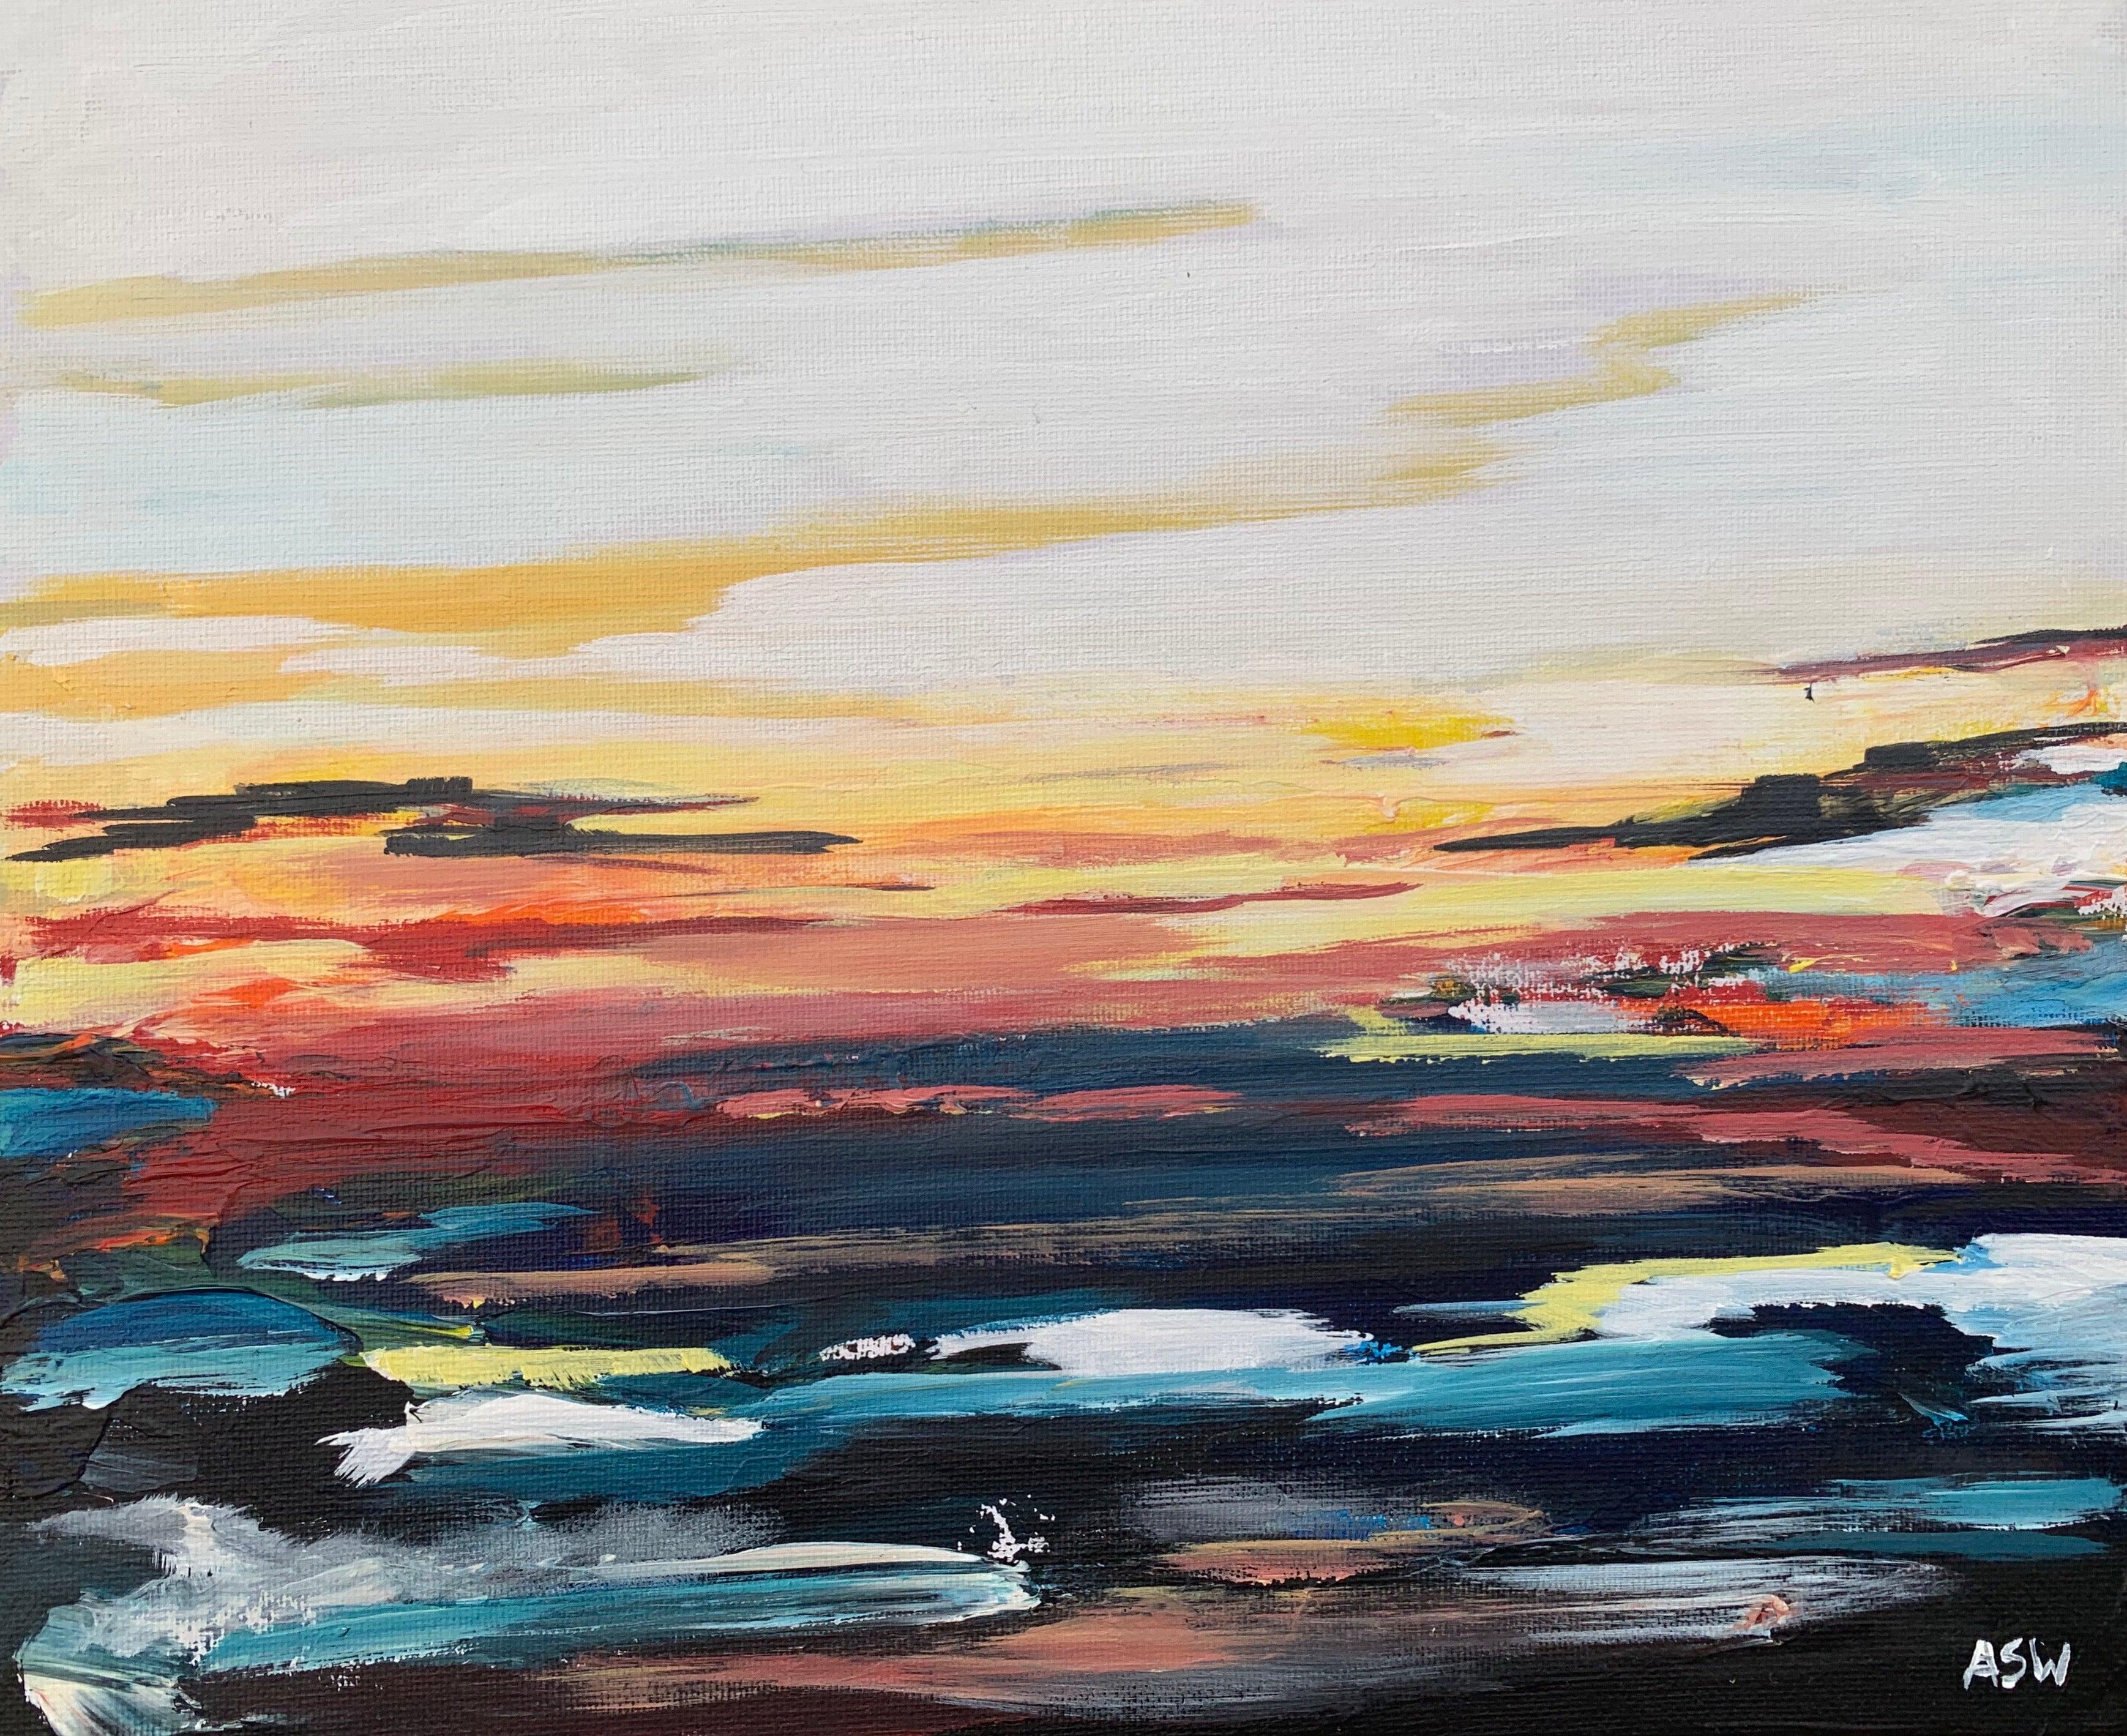 Colourful Abstract Seascape Sunset Study by Leading Contemporary British Artist For Sale 3